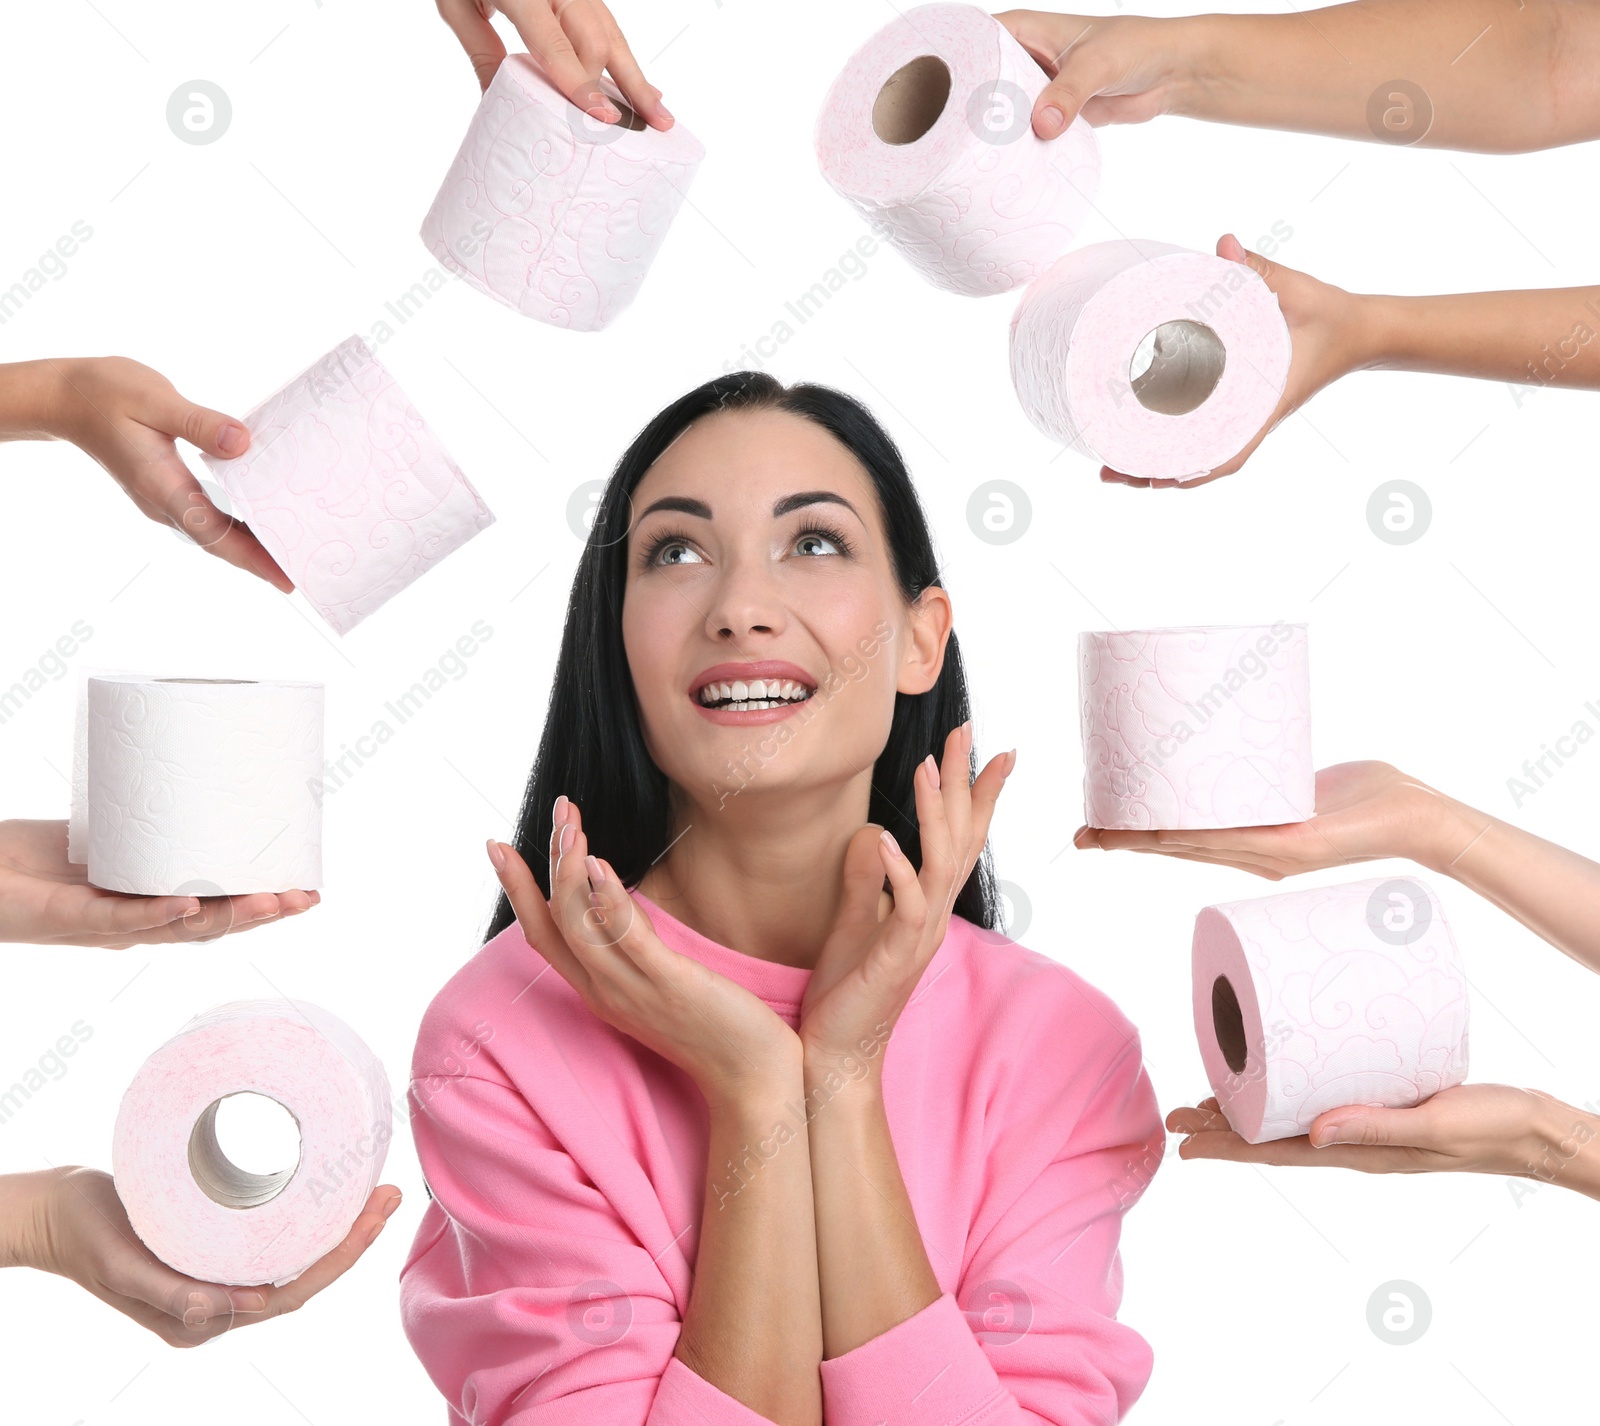 Photo of People offering toilet paper rolls to woman on white background